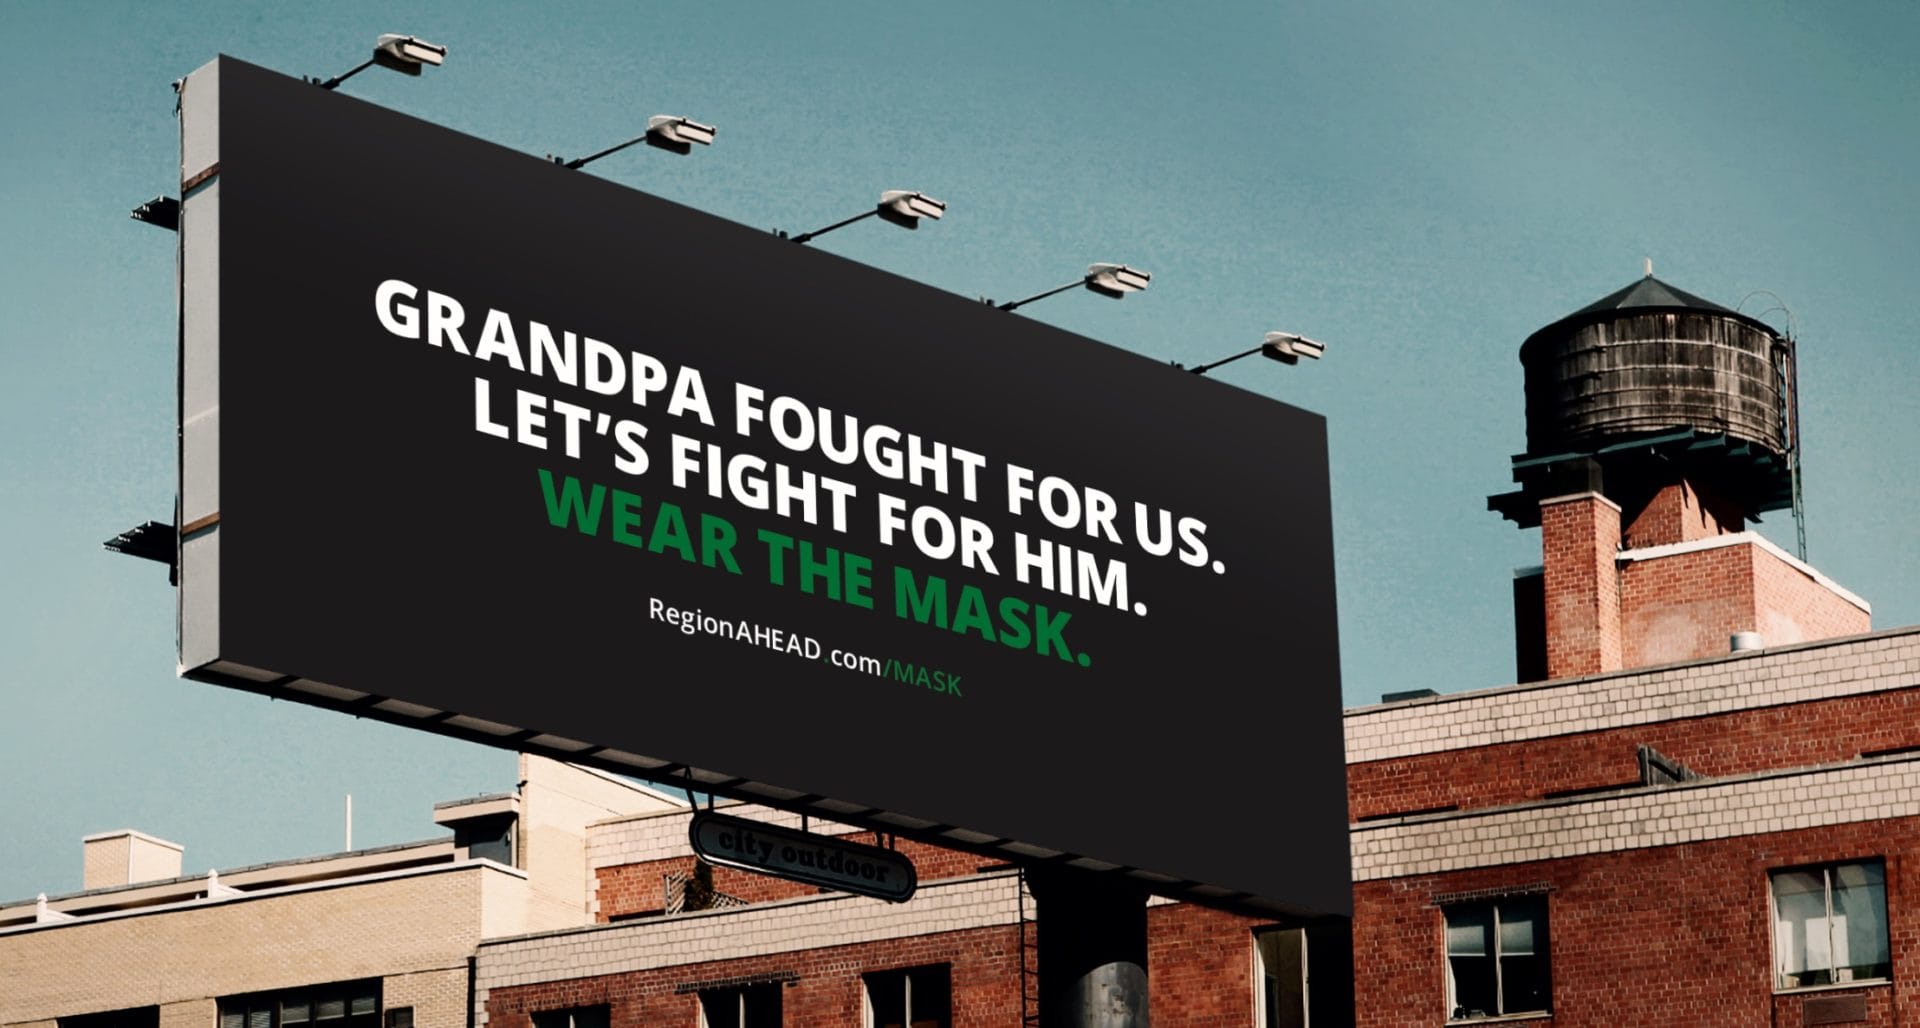 Wear the mask billboard stating that Grandpa fought for us, Let's fight for him.